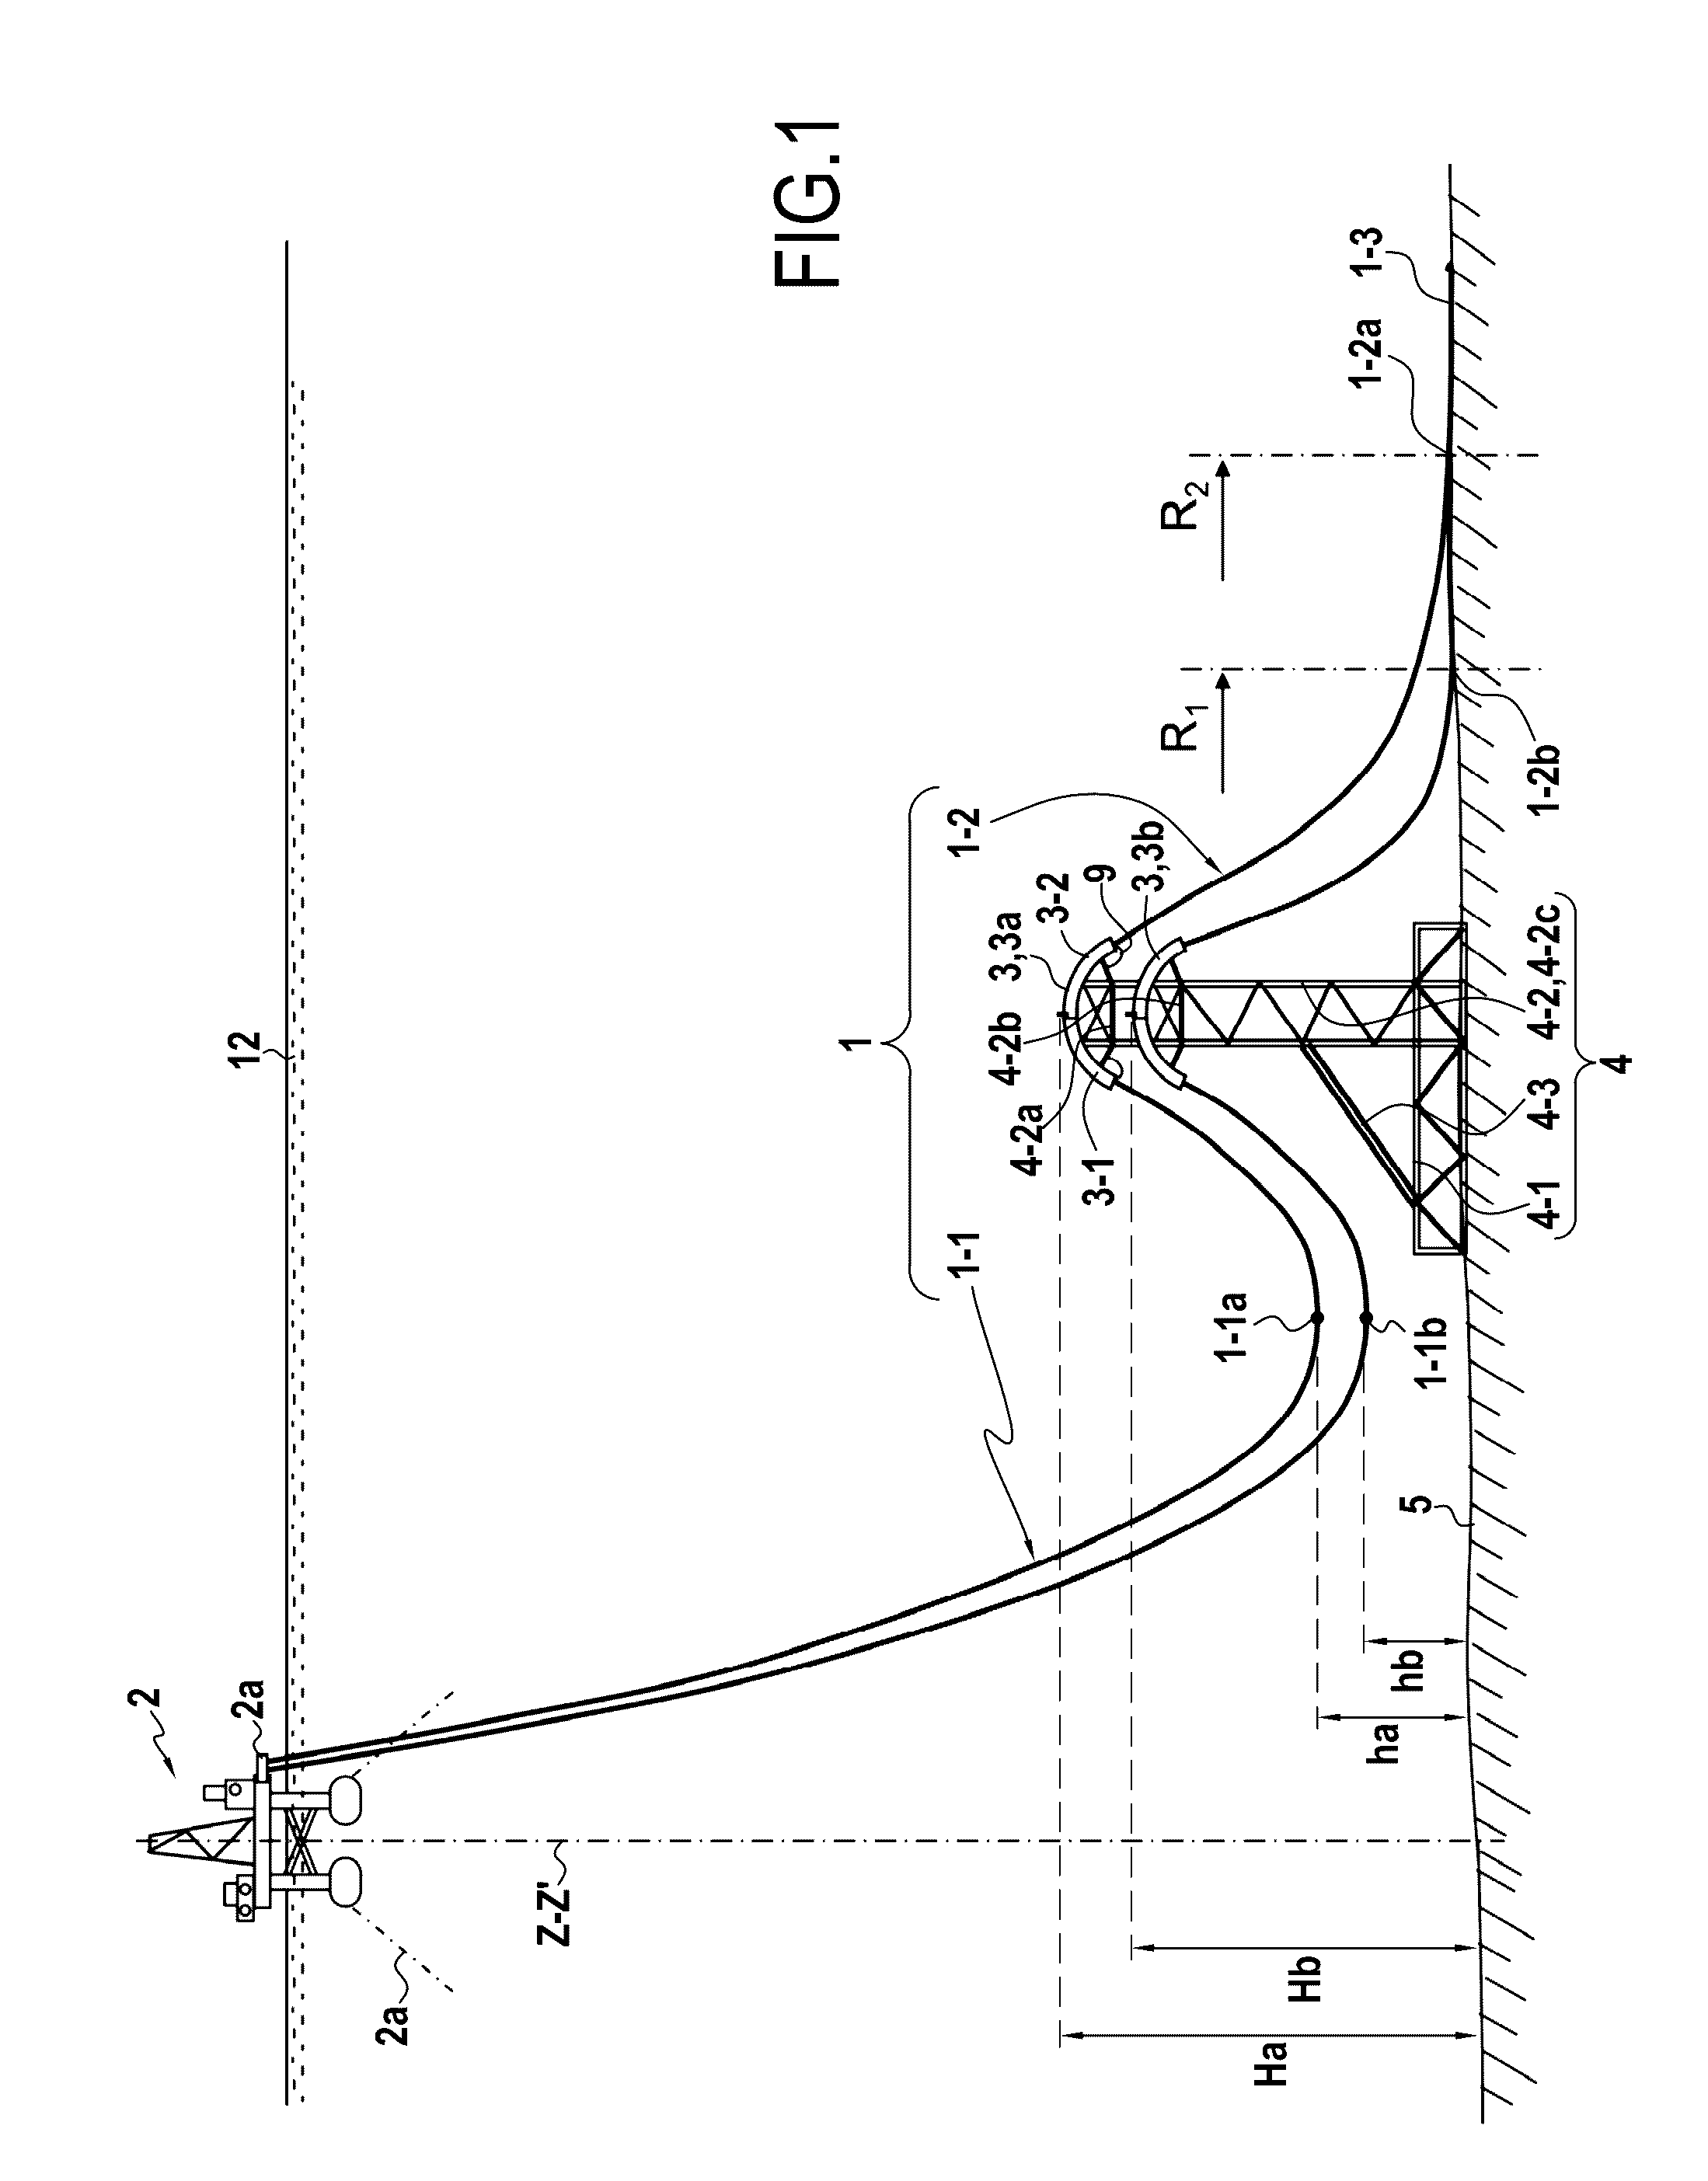 Multiple flexible seafloor-surface linking apparatus comprising at least two levels